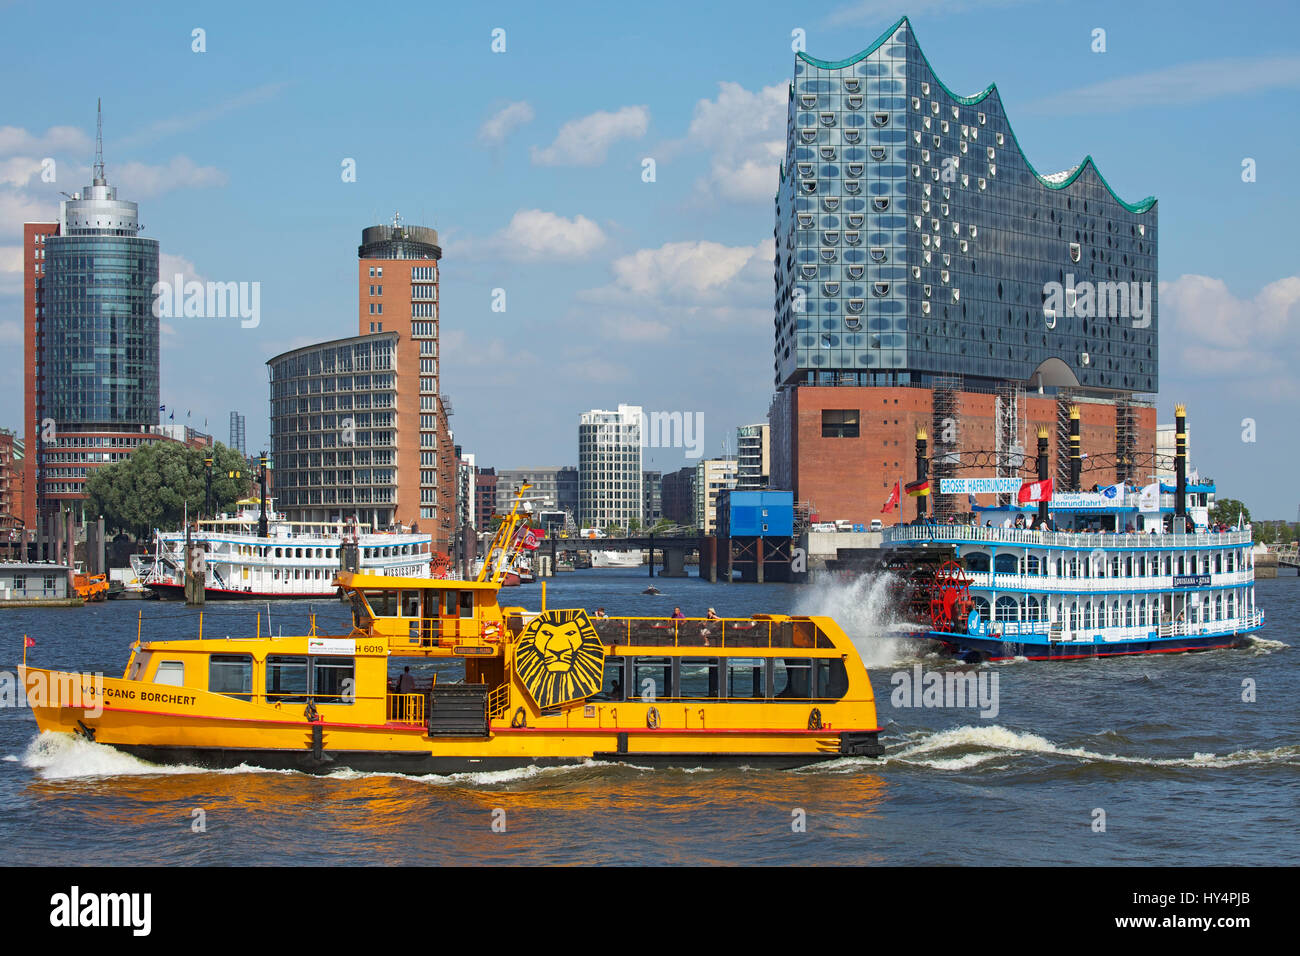 ElbfÃ¤hre (ferry) and harbour cruise in front of the backdrop of HafenCity of Hamburg and the Elbe Philharmonic Hall, Stock Photo